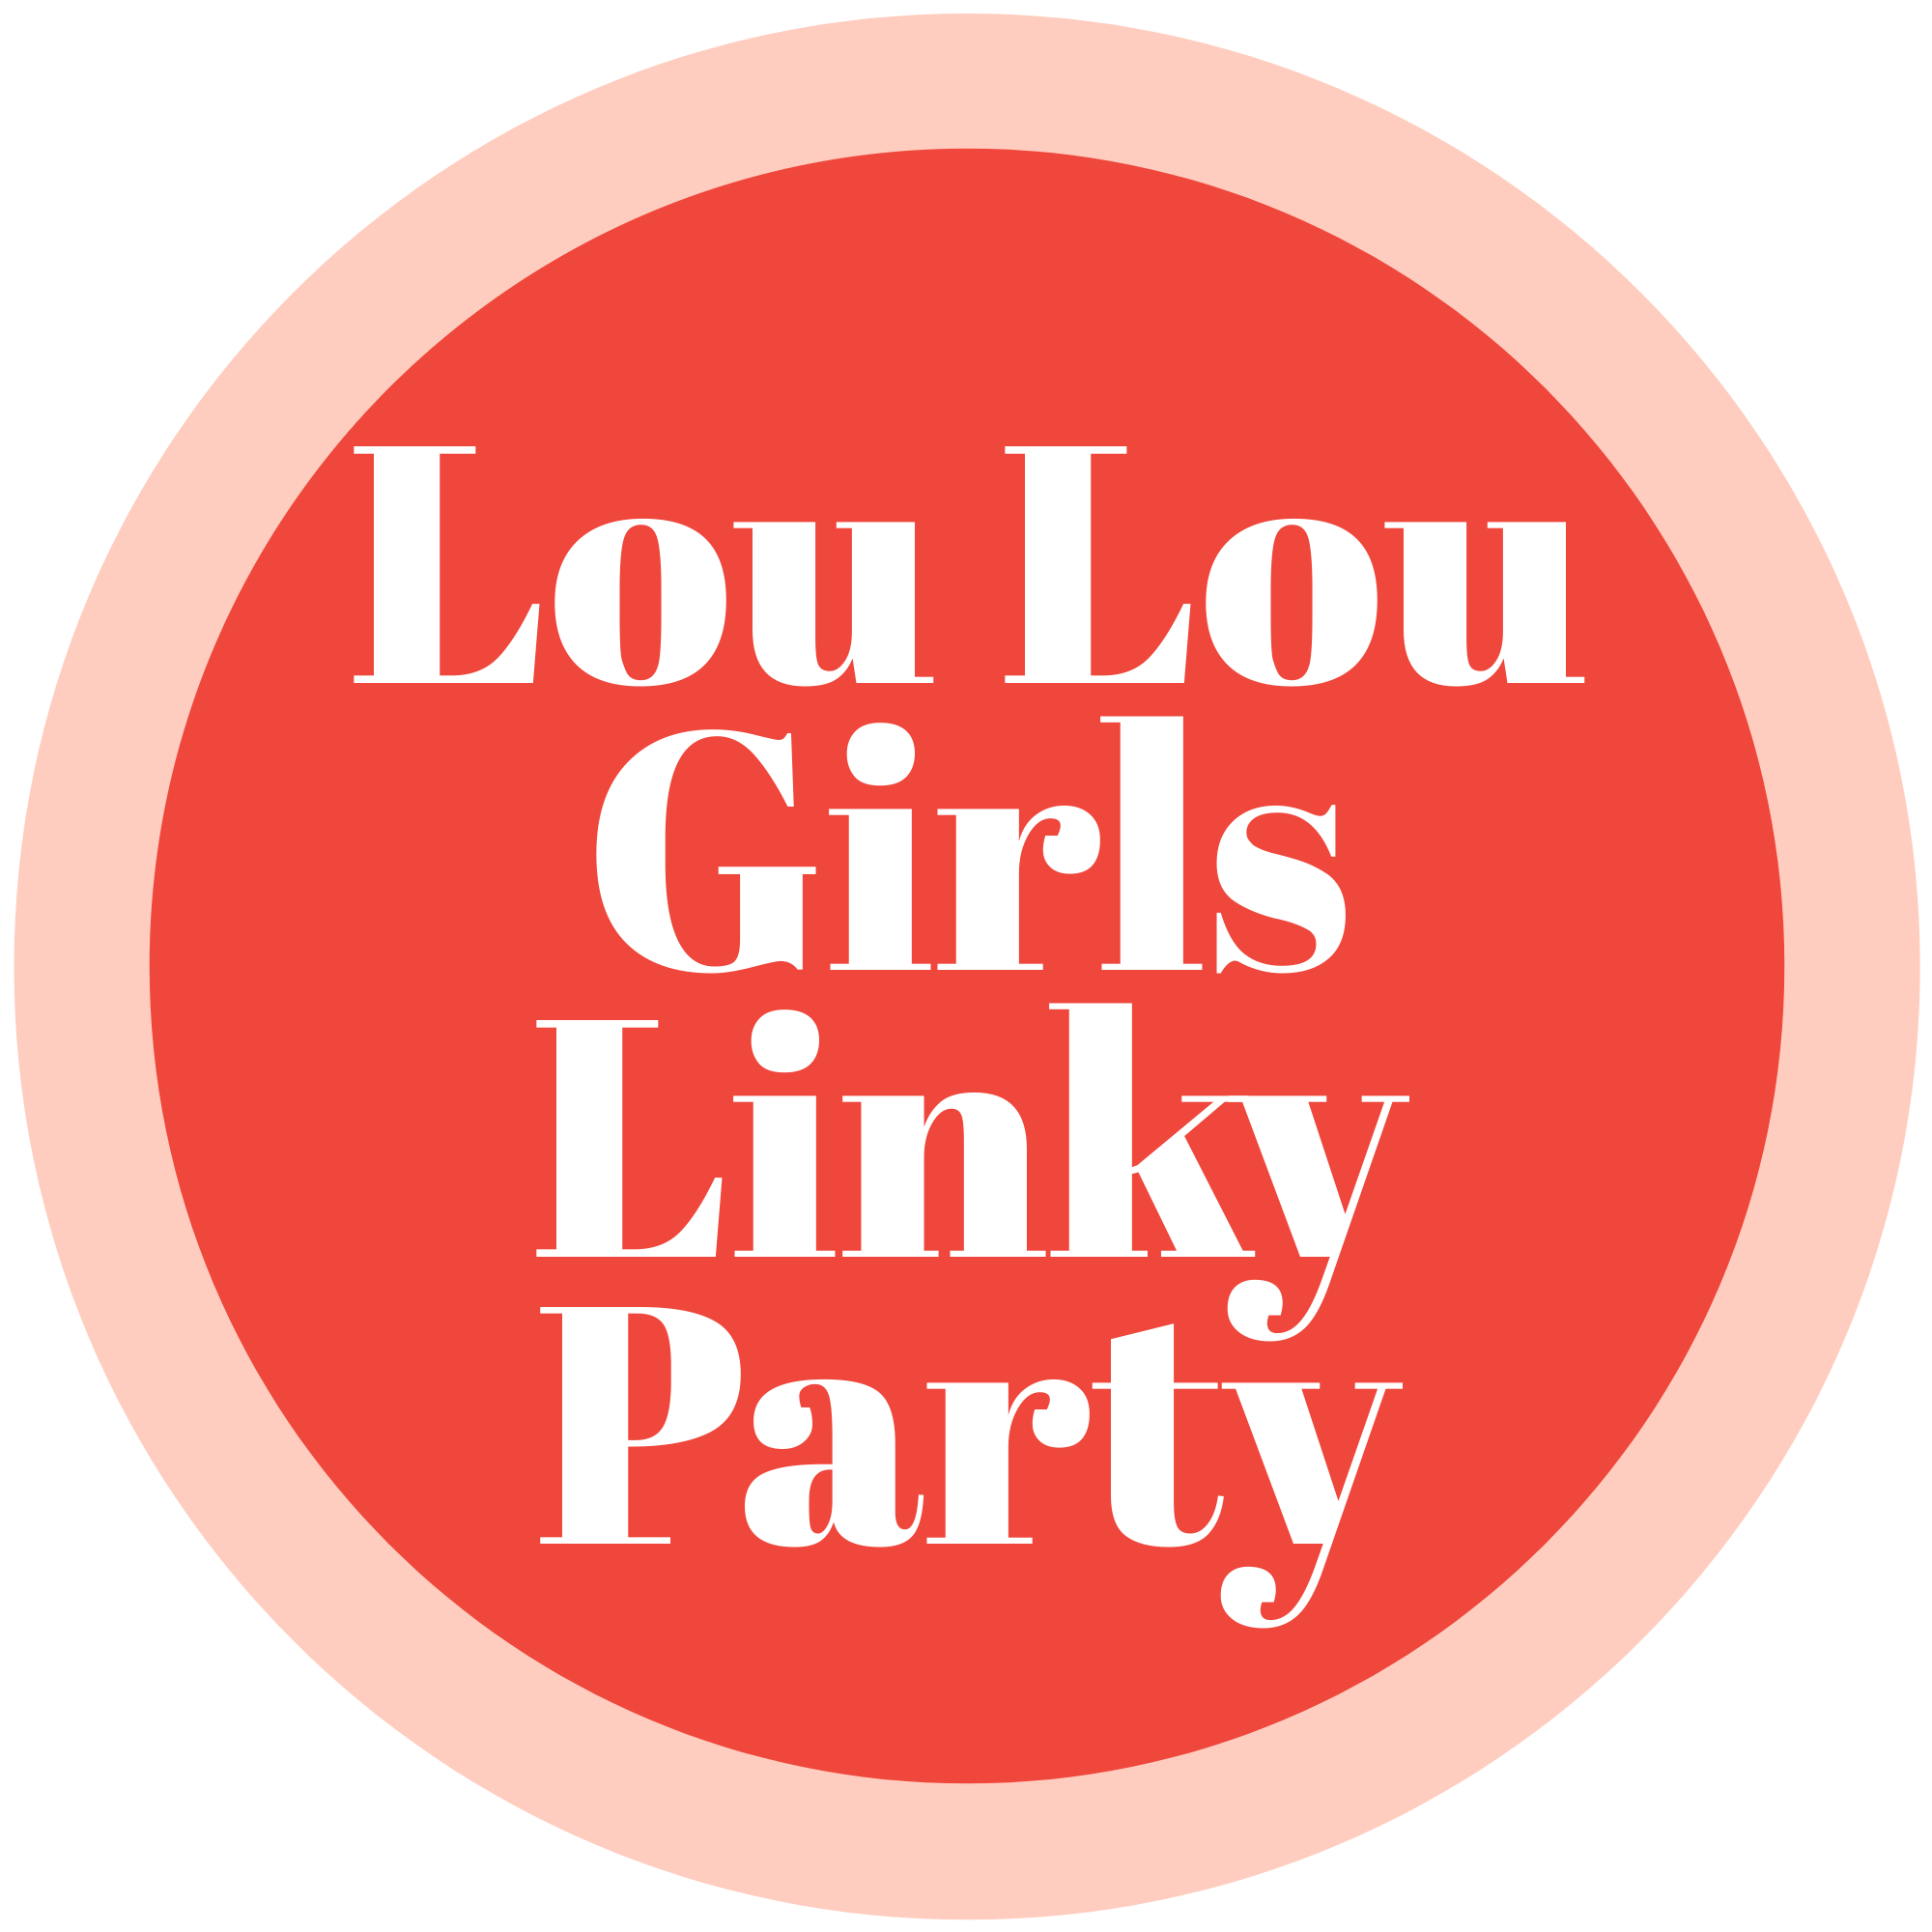 Lou Lou Girls Fabulous Party 493 #linkyparty #bloghop #linkyparties